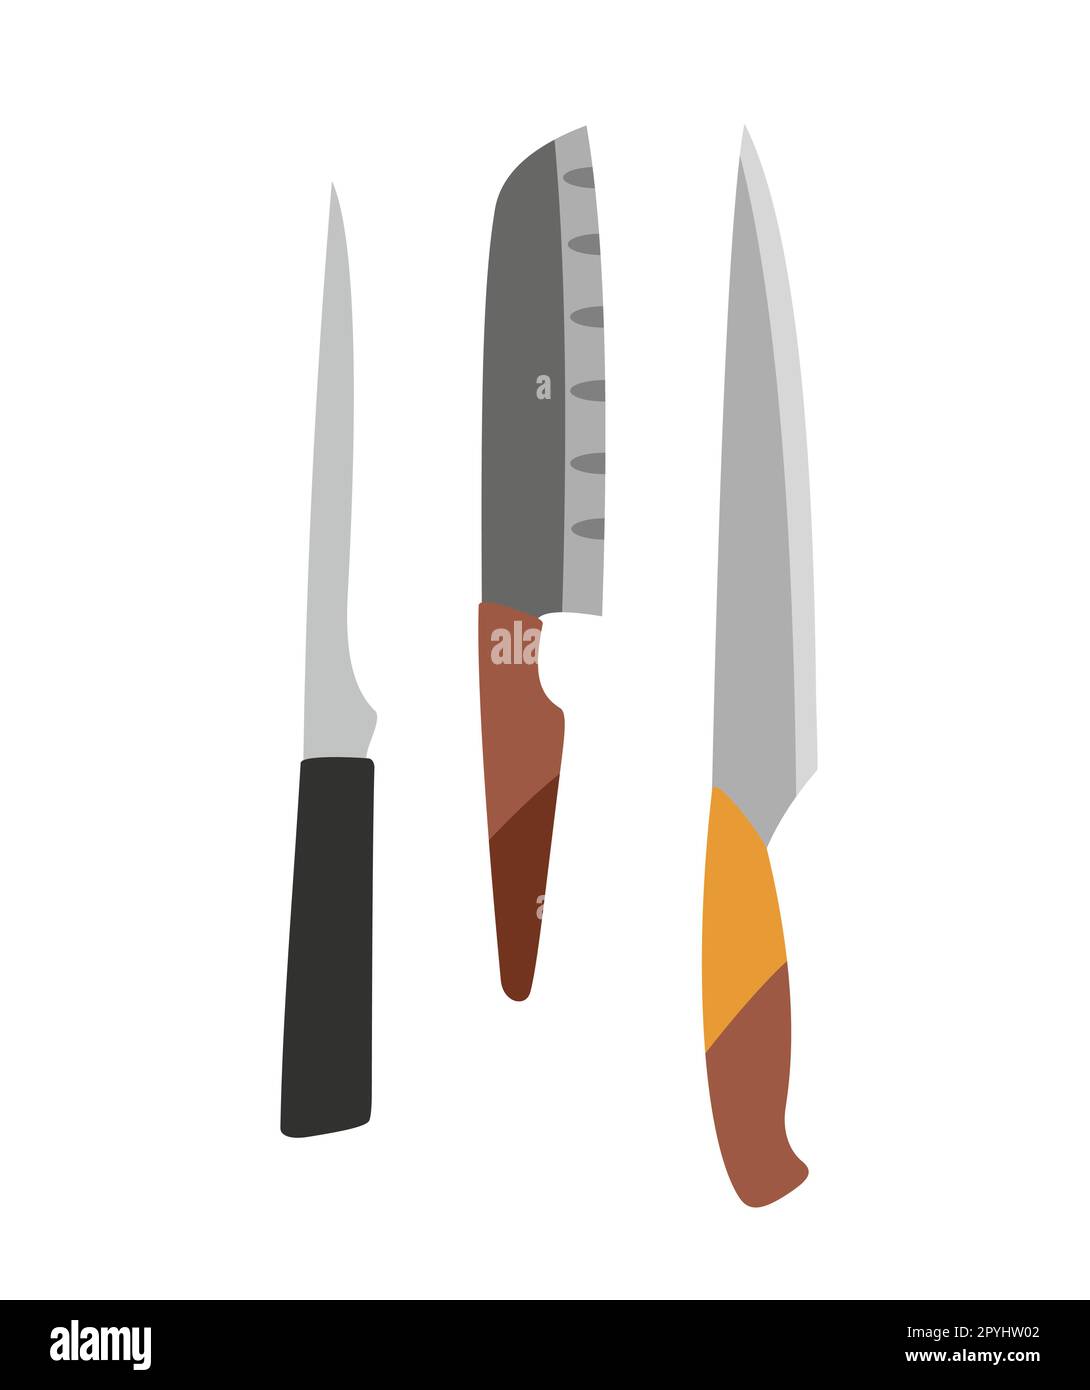 FIsh Cutting Knives Set. Poster Butcher Diagram and Scheme Stock